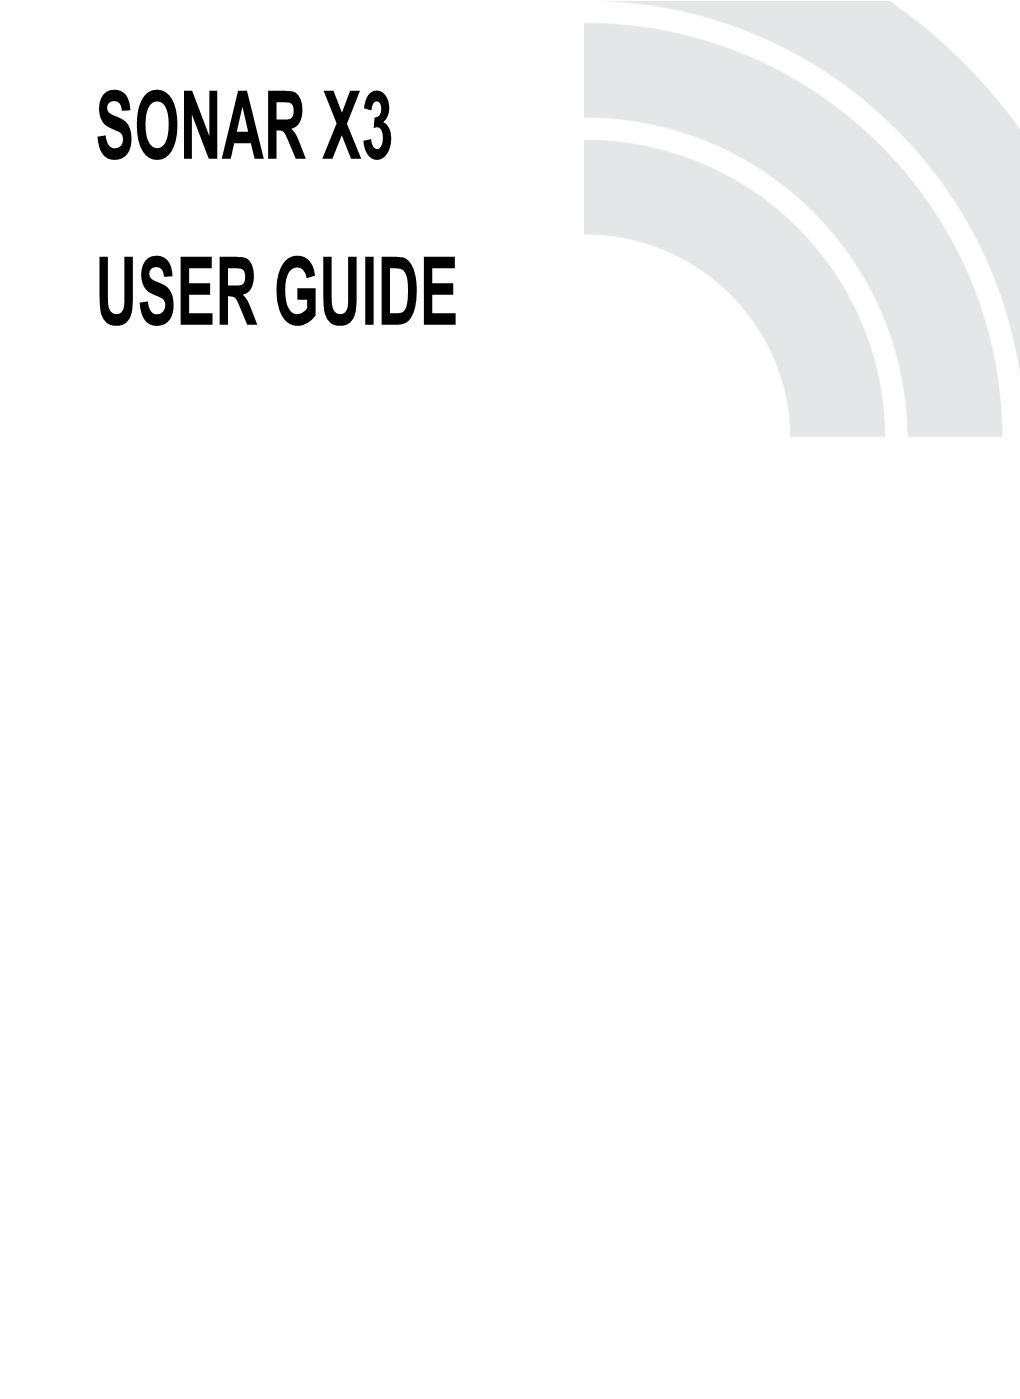 SONAR X3 USER GUIDE Information in This Document Is Subject to Change Without Notice and Does Not Represent a Commit- Ment on the Part of Cakewalk, Inc